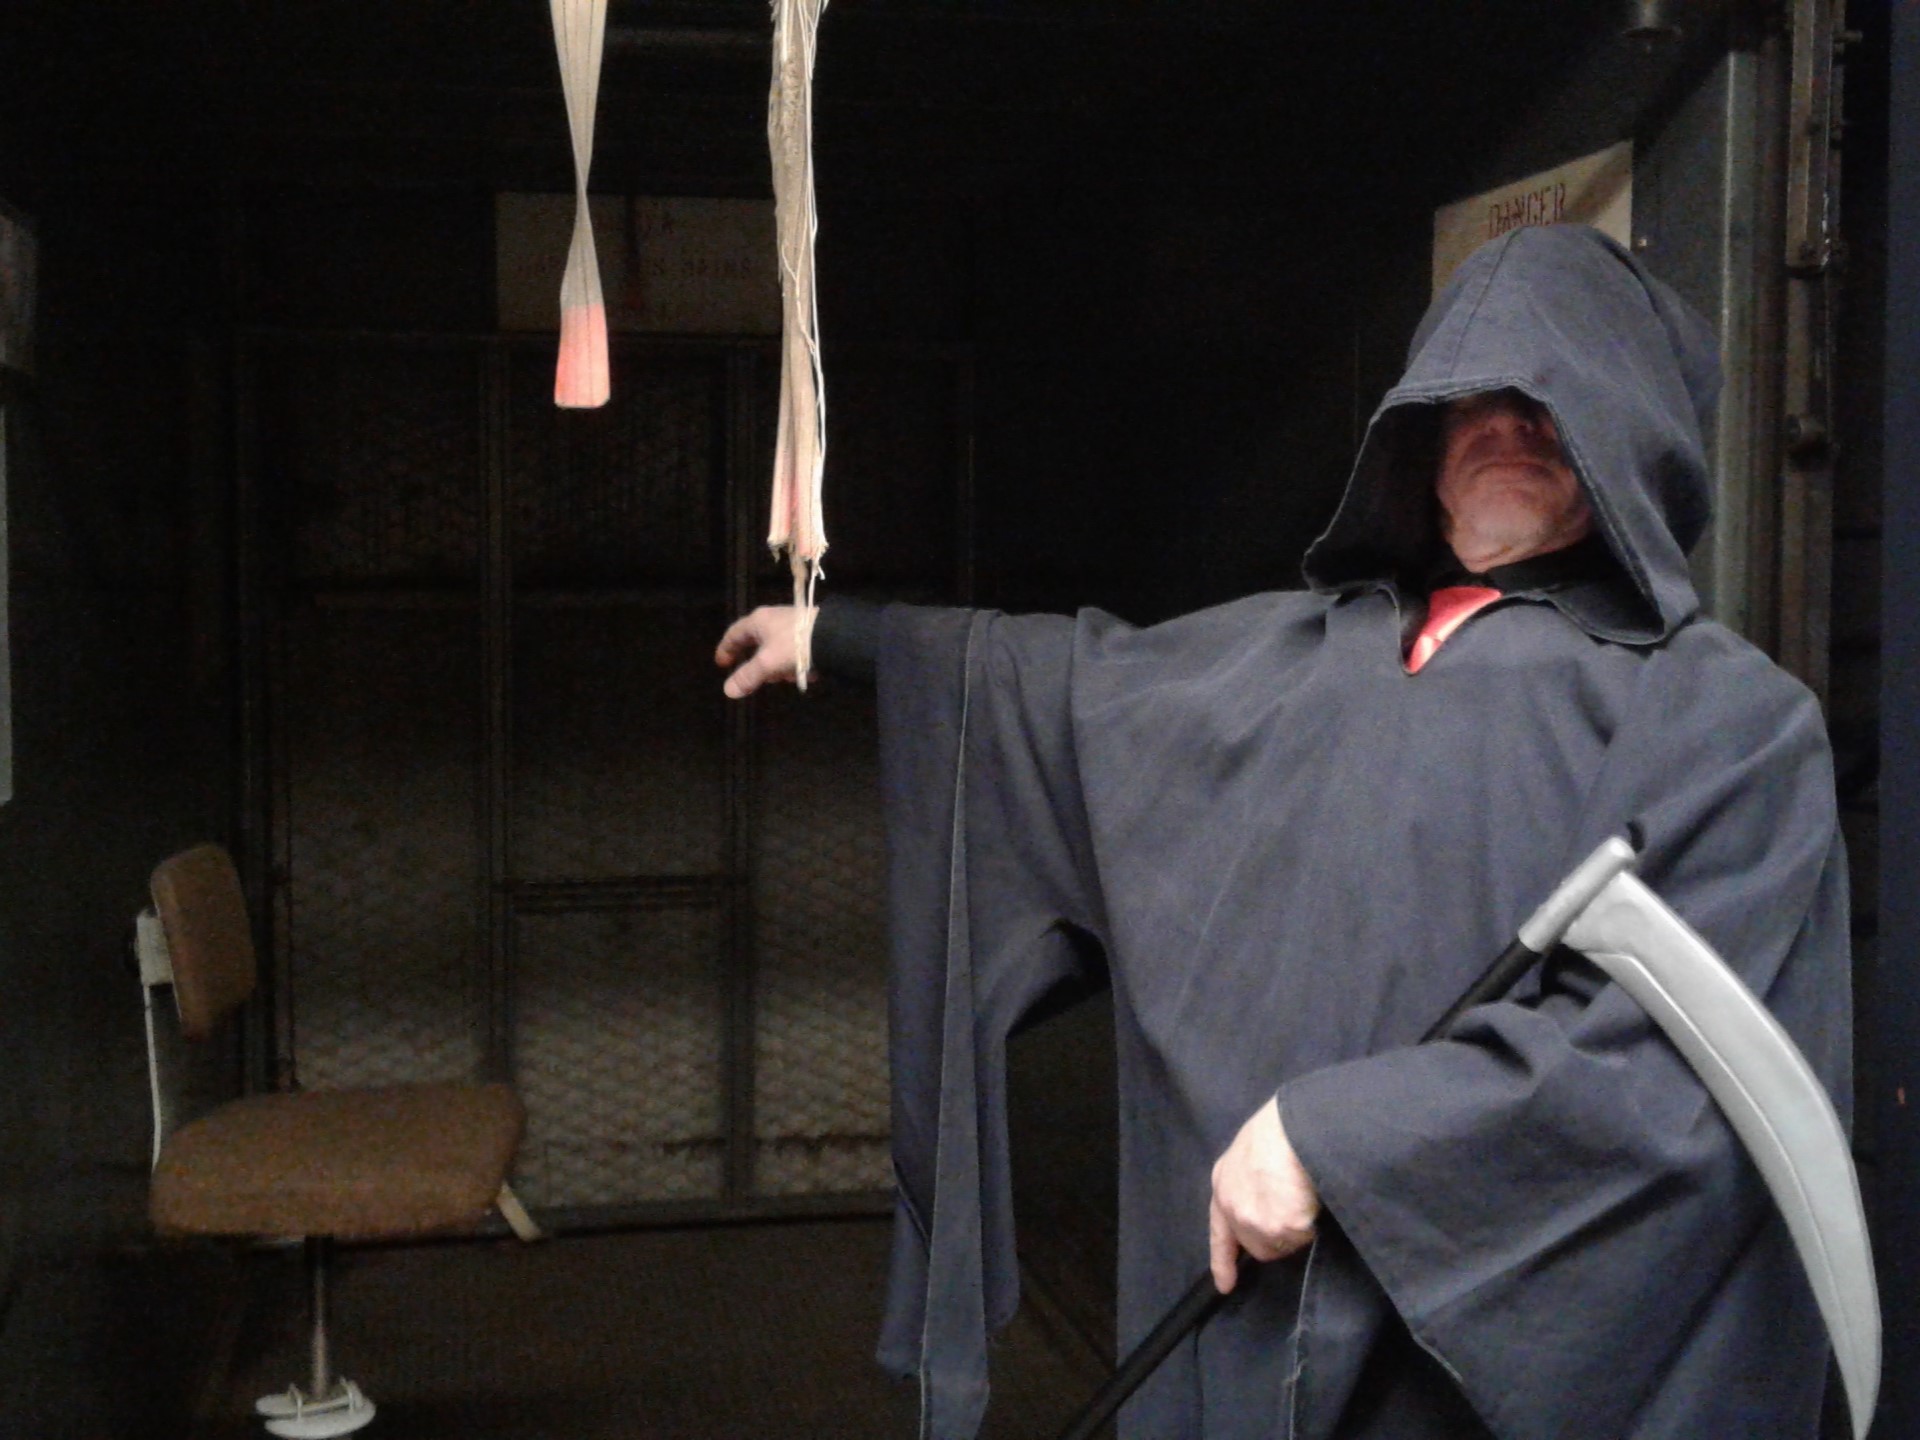 Past Diefenbunker employee dressed as the Grim Reaper stands in front of the freight elevator during a holiday party.